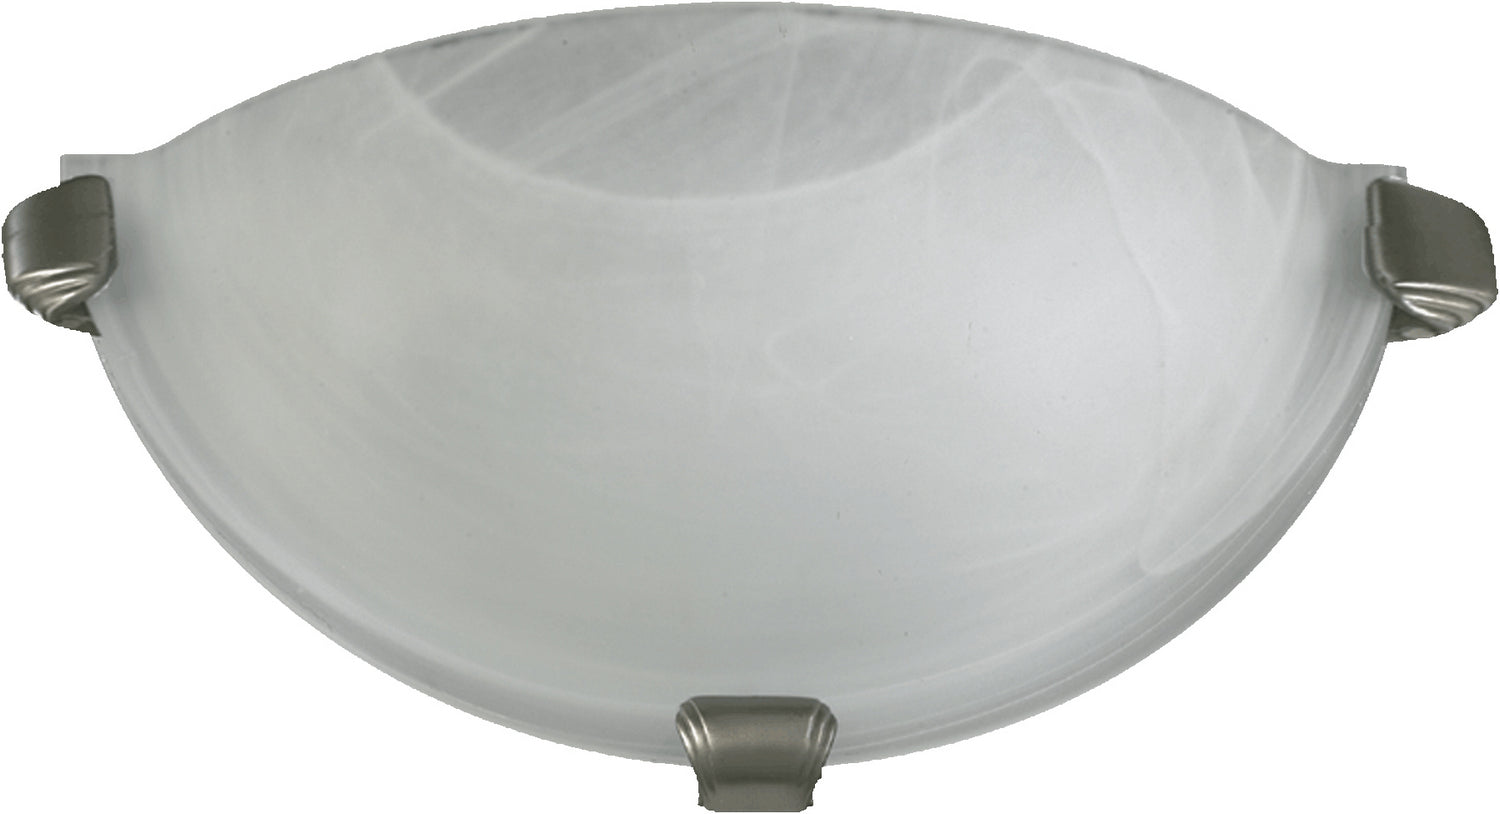 Quorum - 5629-65 - One Light Wall Sconce - 5629 Wall Sconce - Satin Nickel